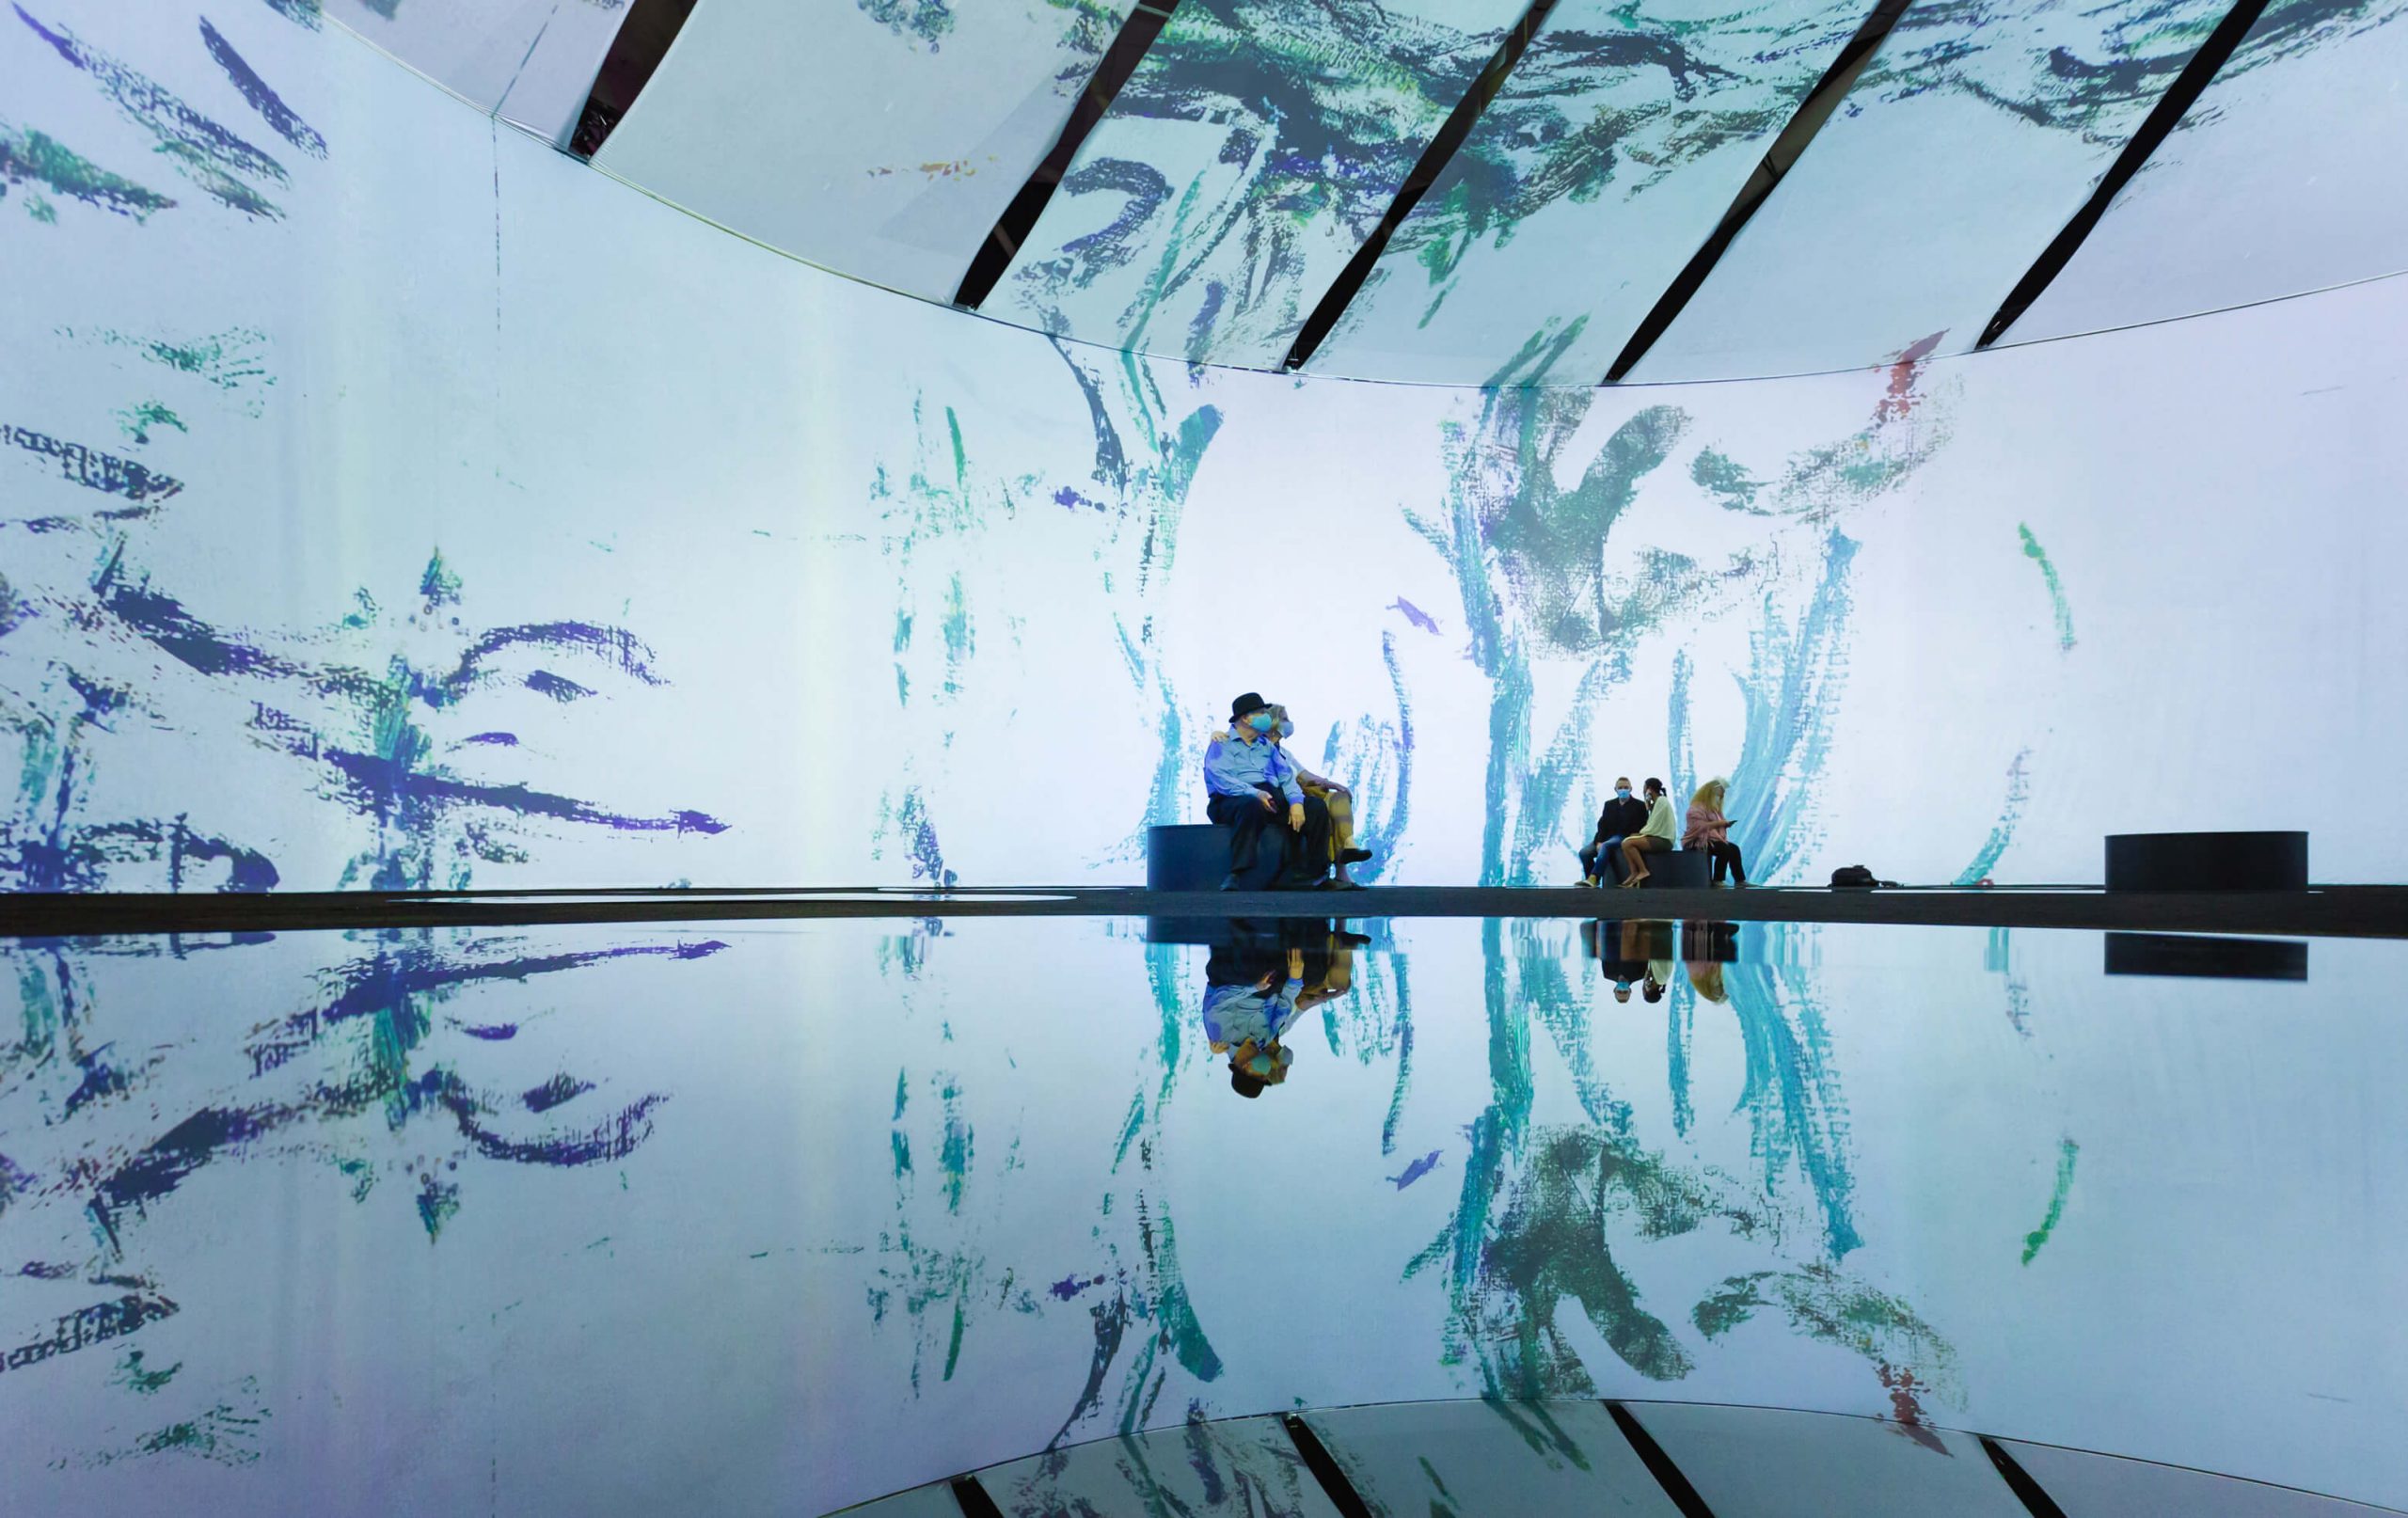 Britto Charette: Beyond Monet: Immersive Art Experience at Miami’s Ice Palace Studios